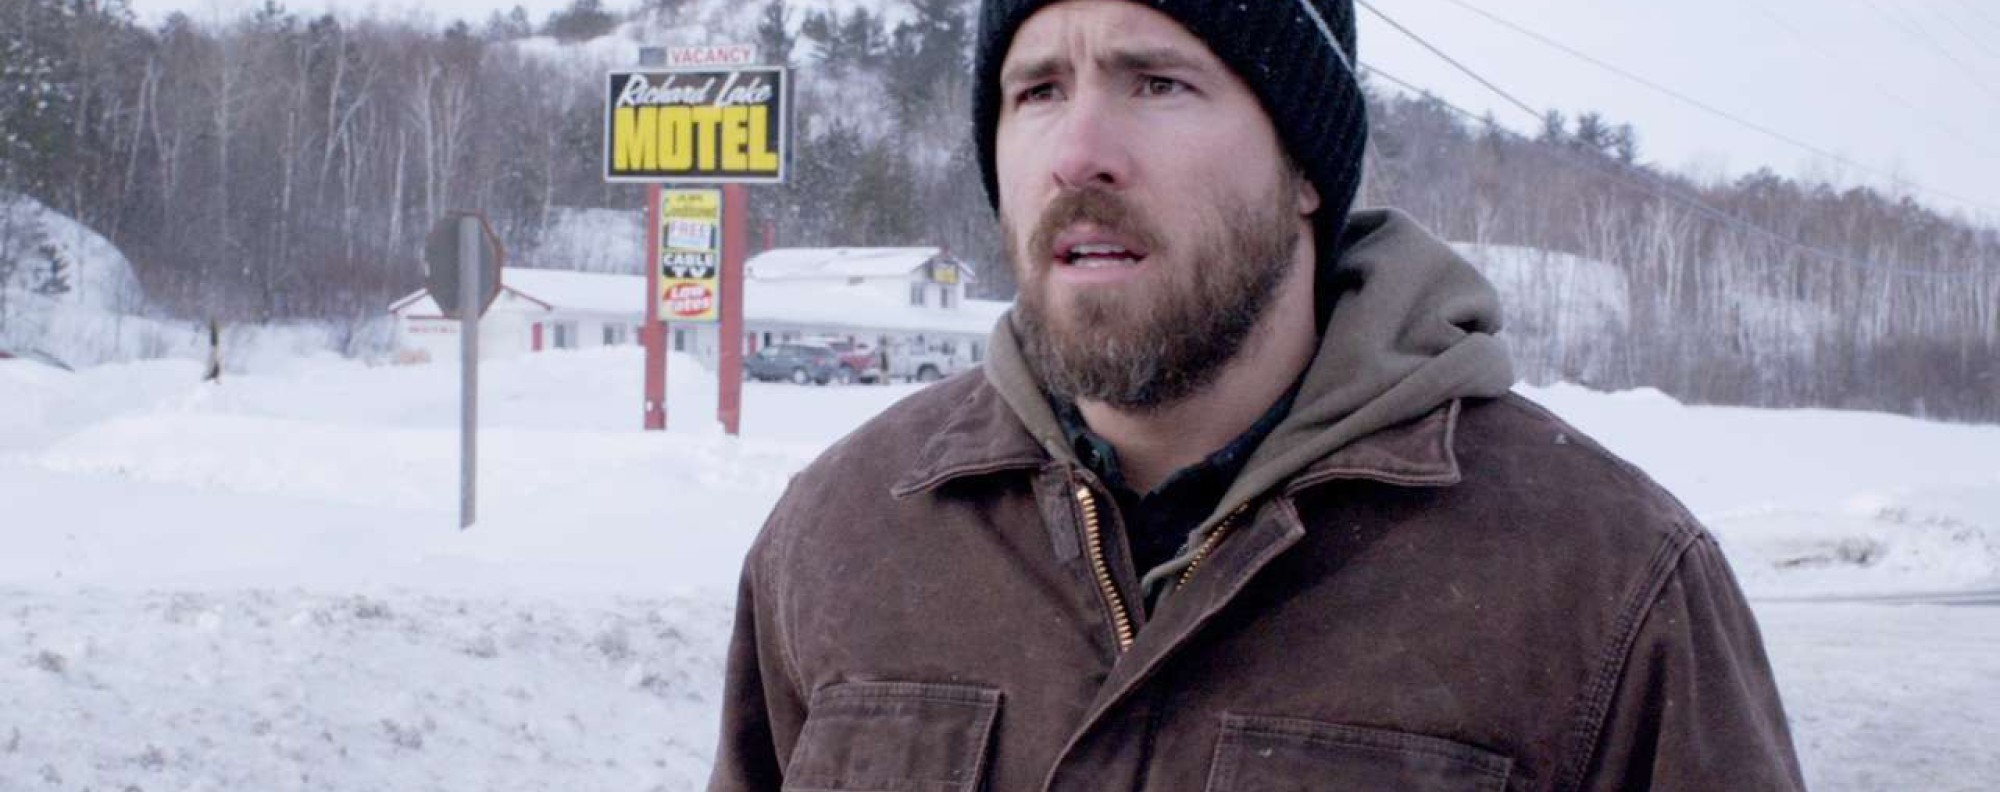 The Captive review: Uncomfortable child abuse thriller from Atom